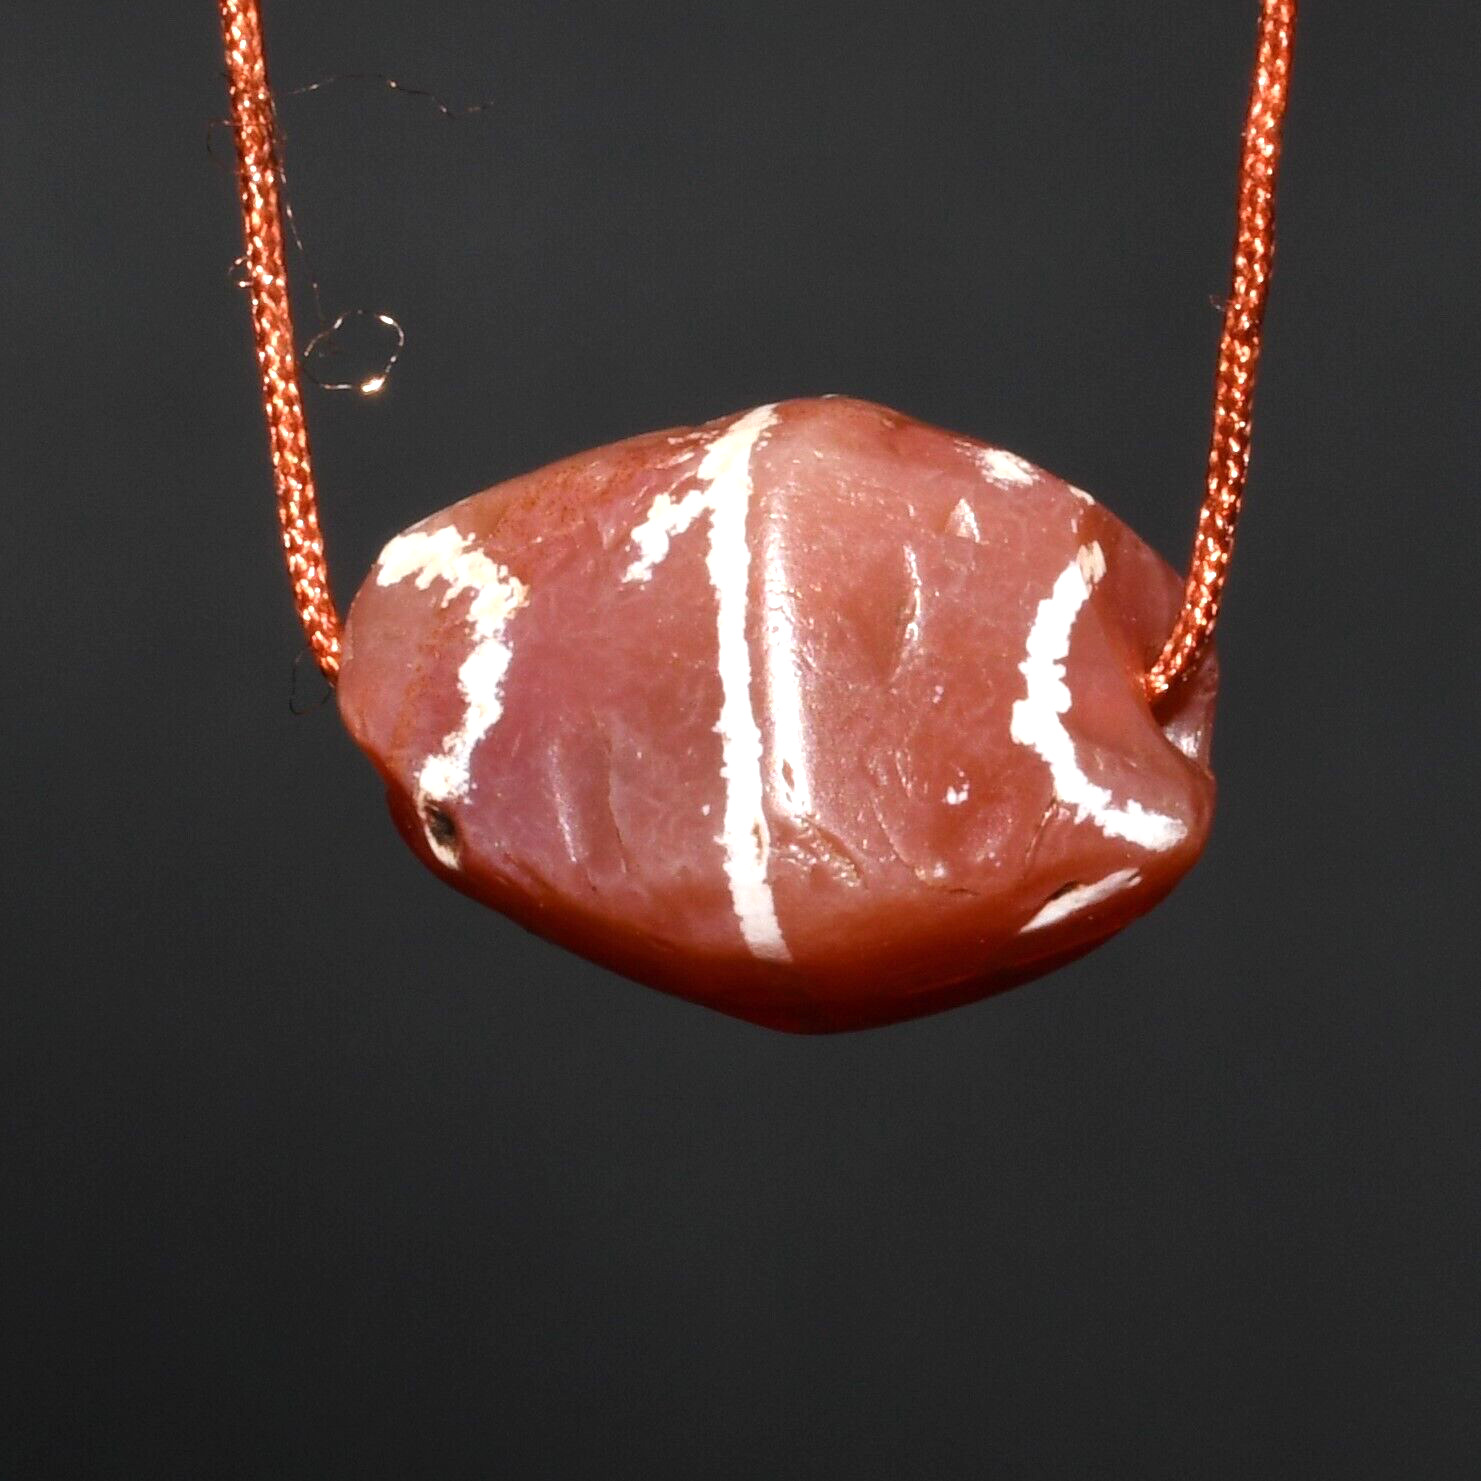 Ancient Near Eastern Etched Carnelian Bead with Stripes over 1500 Years Old